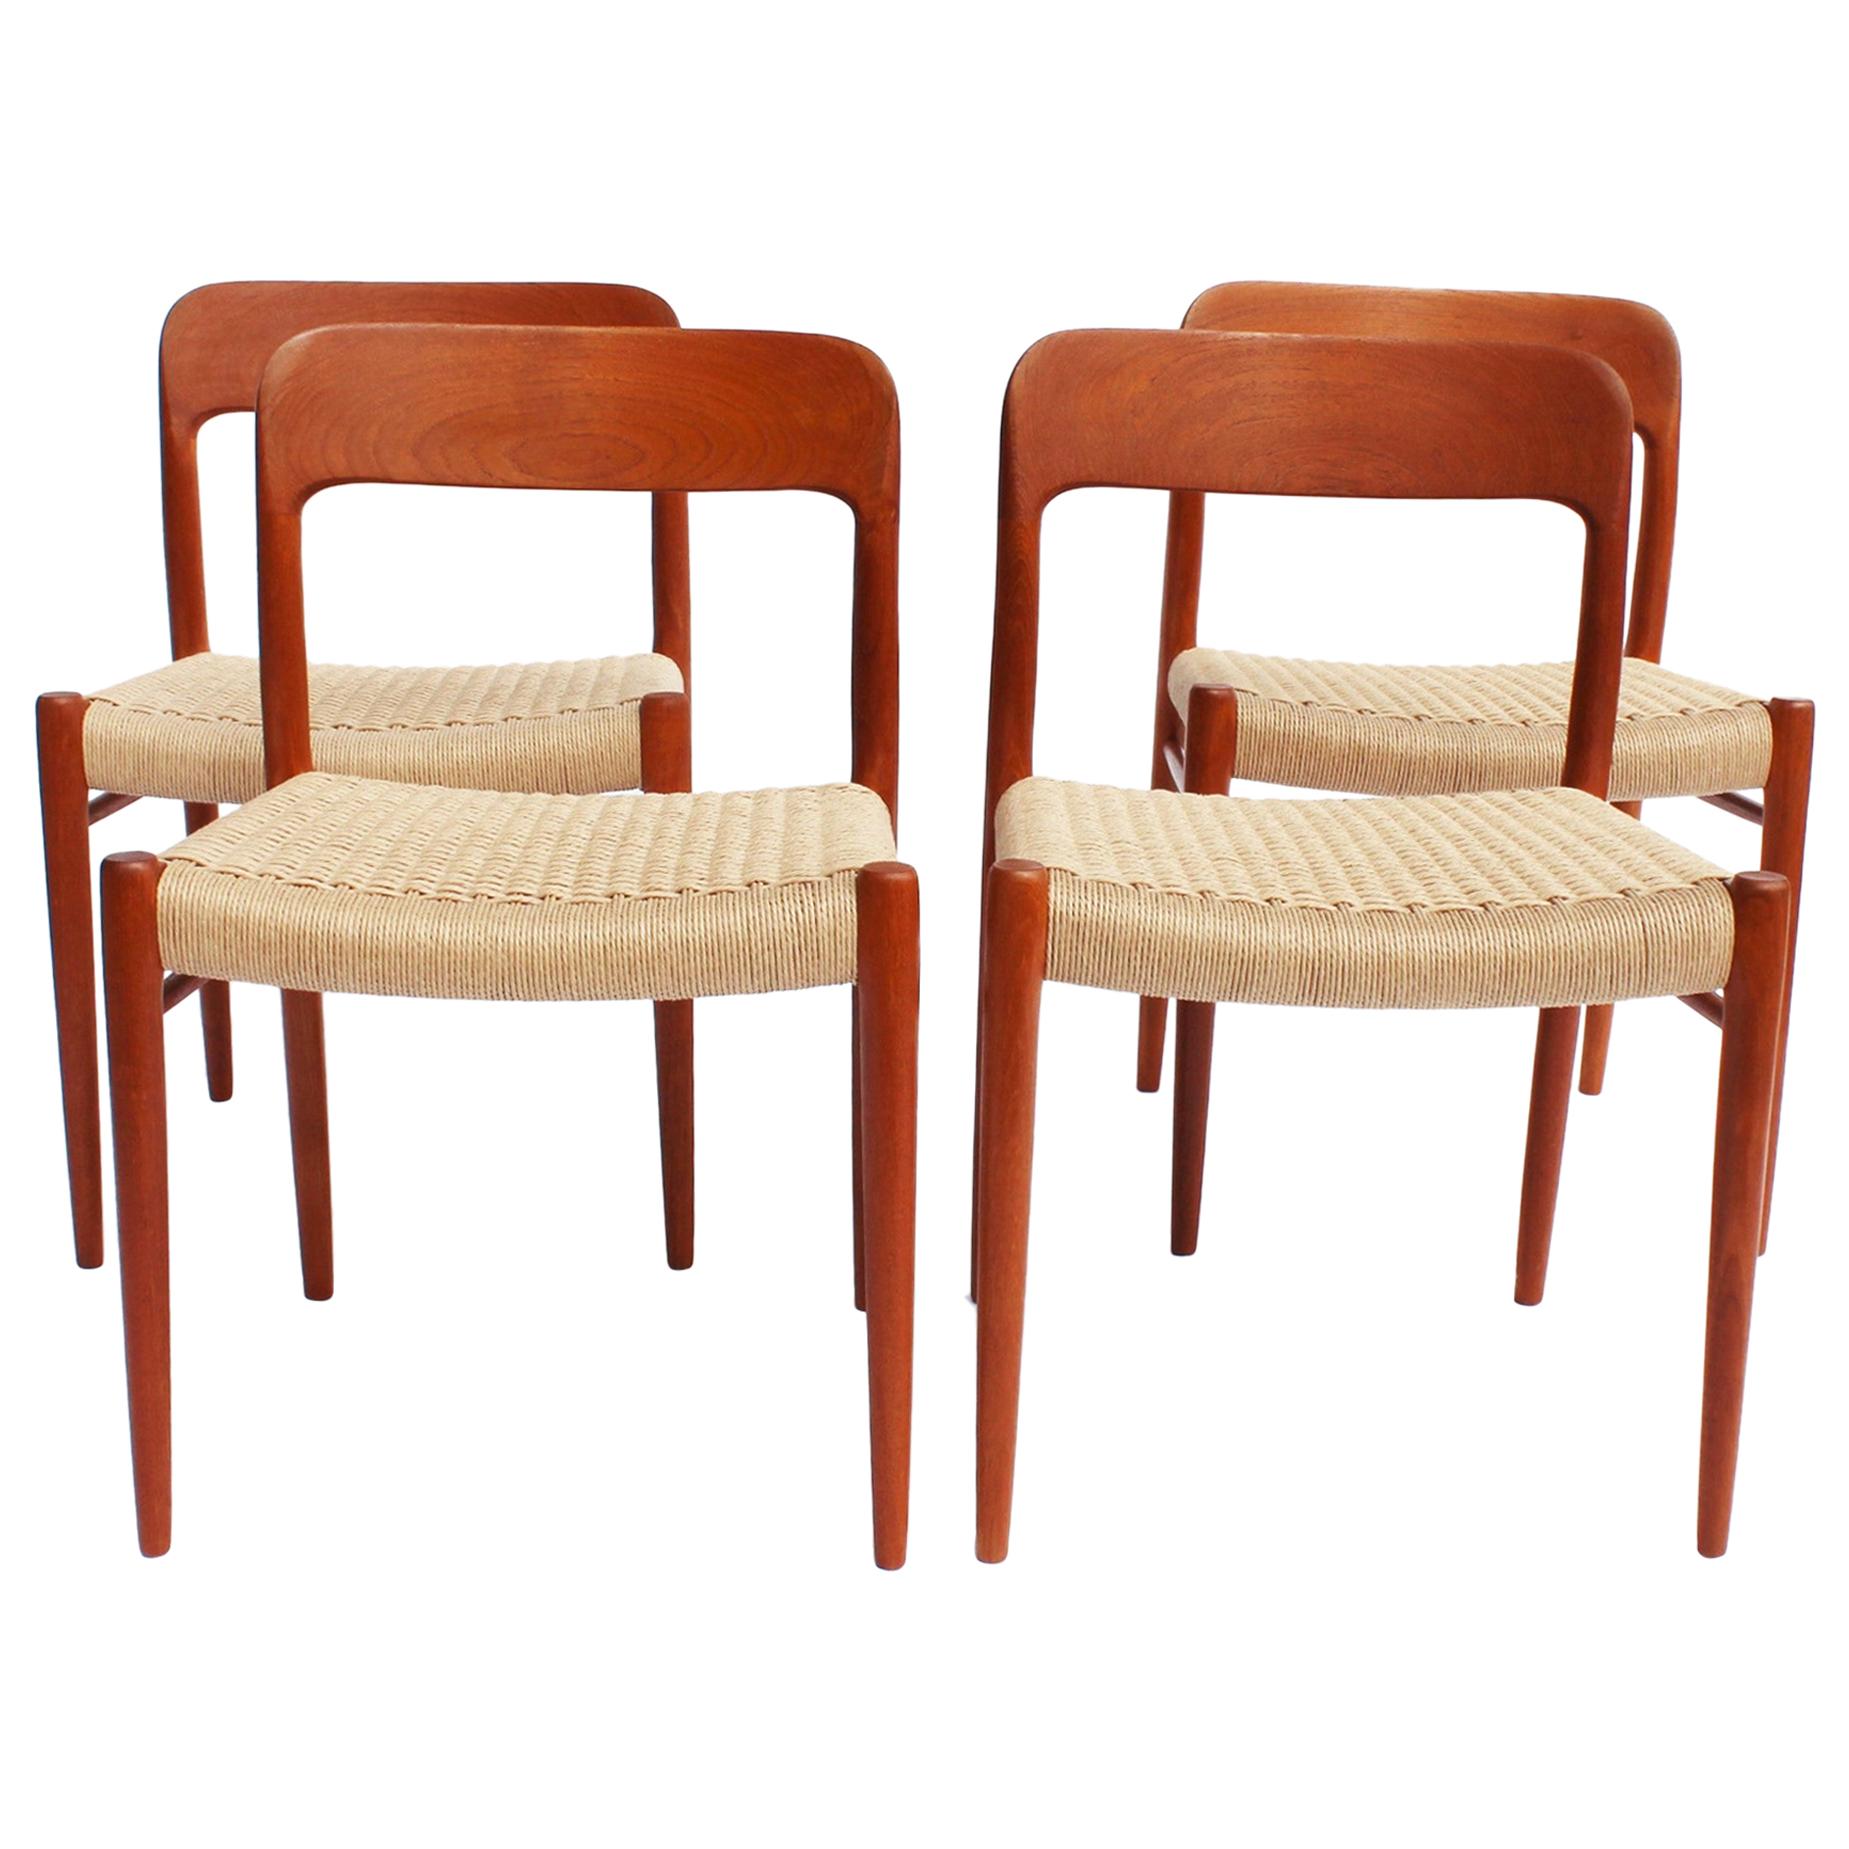 Set of Four Dining Chairs, Model 75, in Teak and Papercord by N.O. Møller